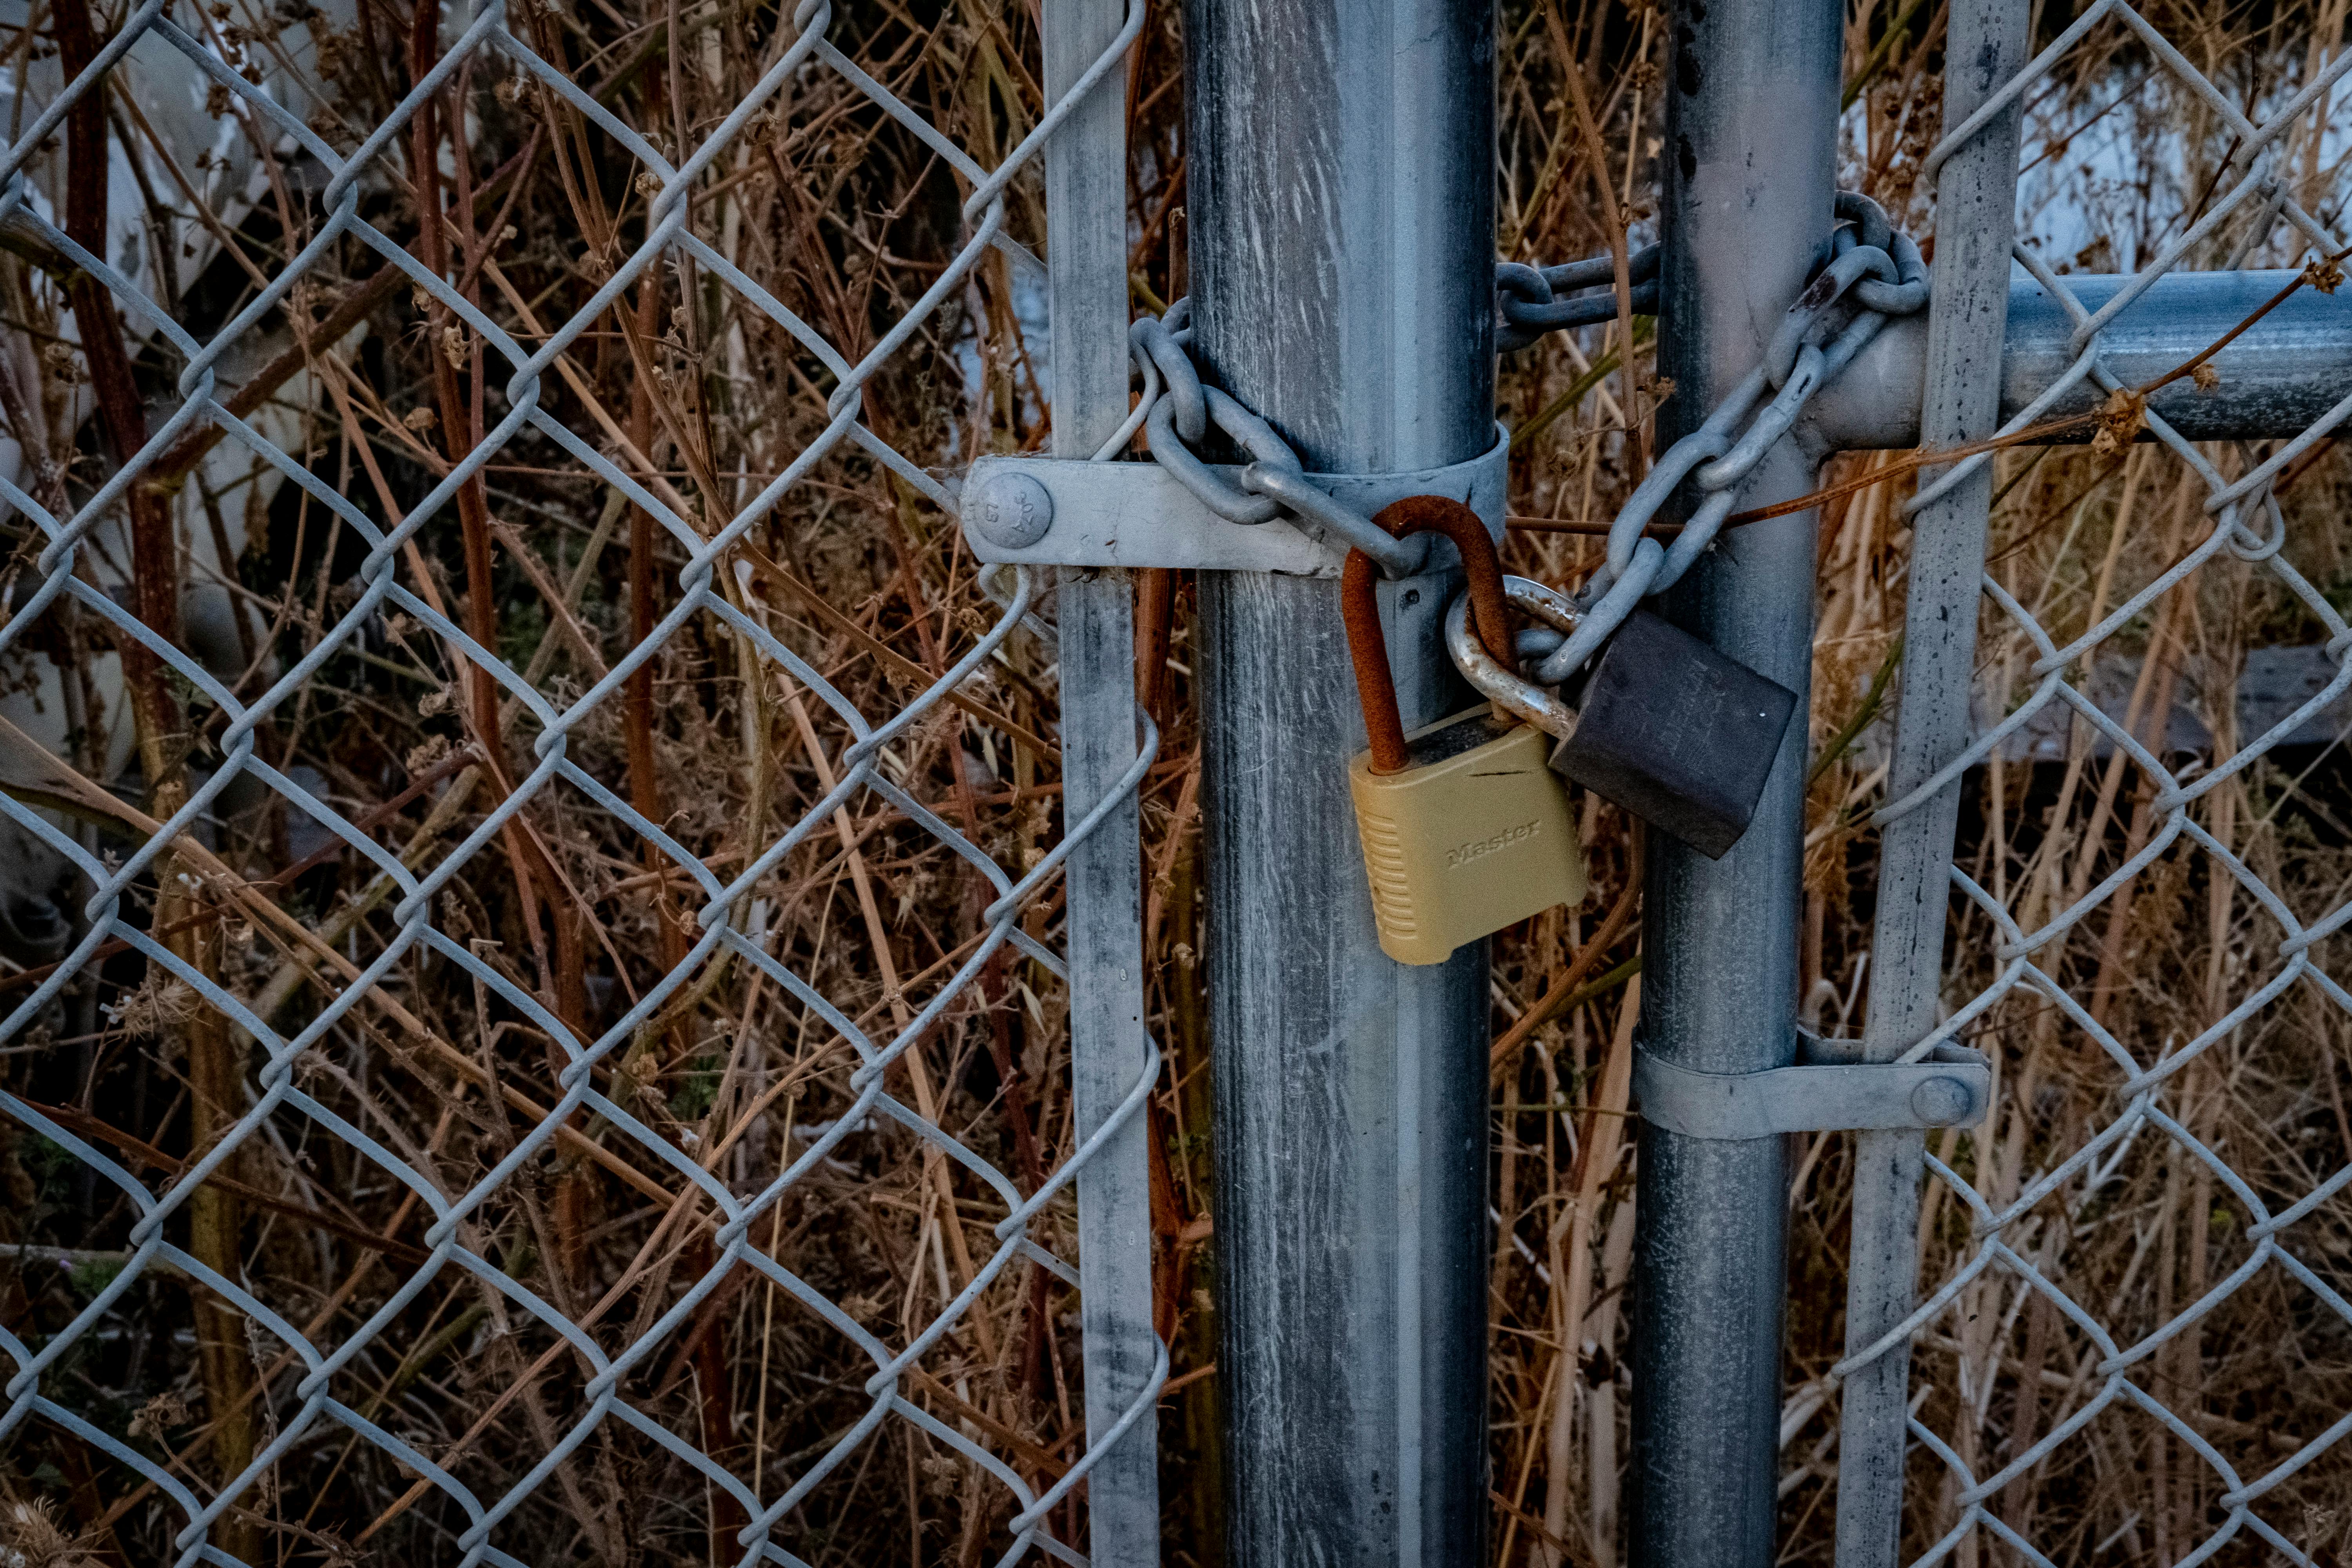 Fence with chain and lock stock image. Image of trees - 16735309